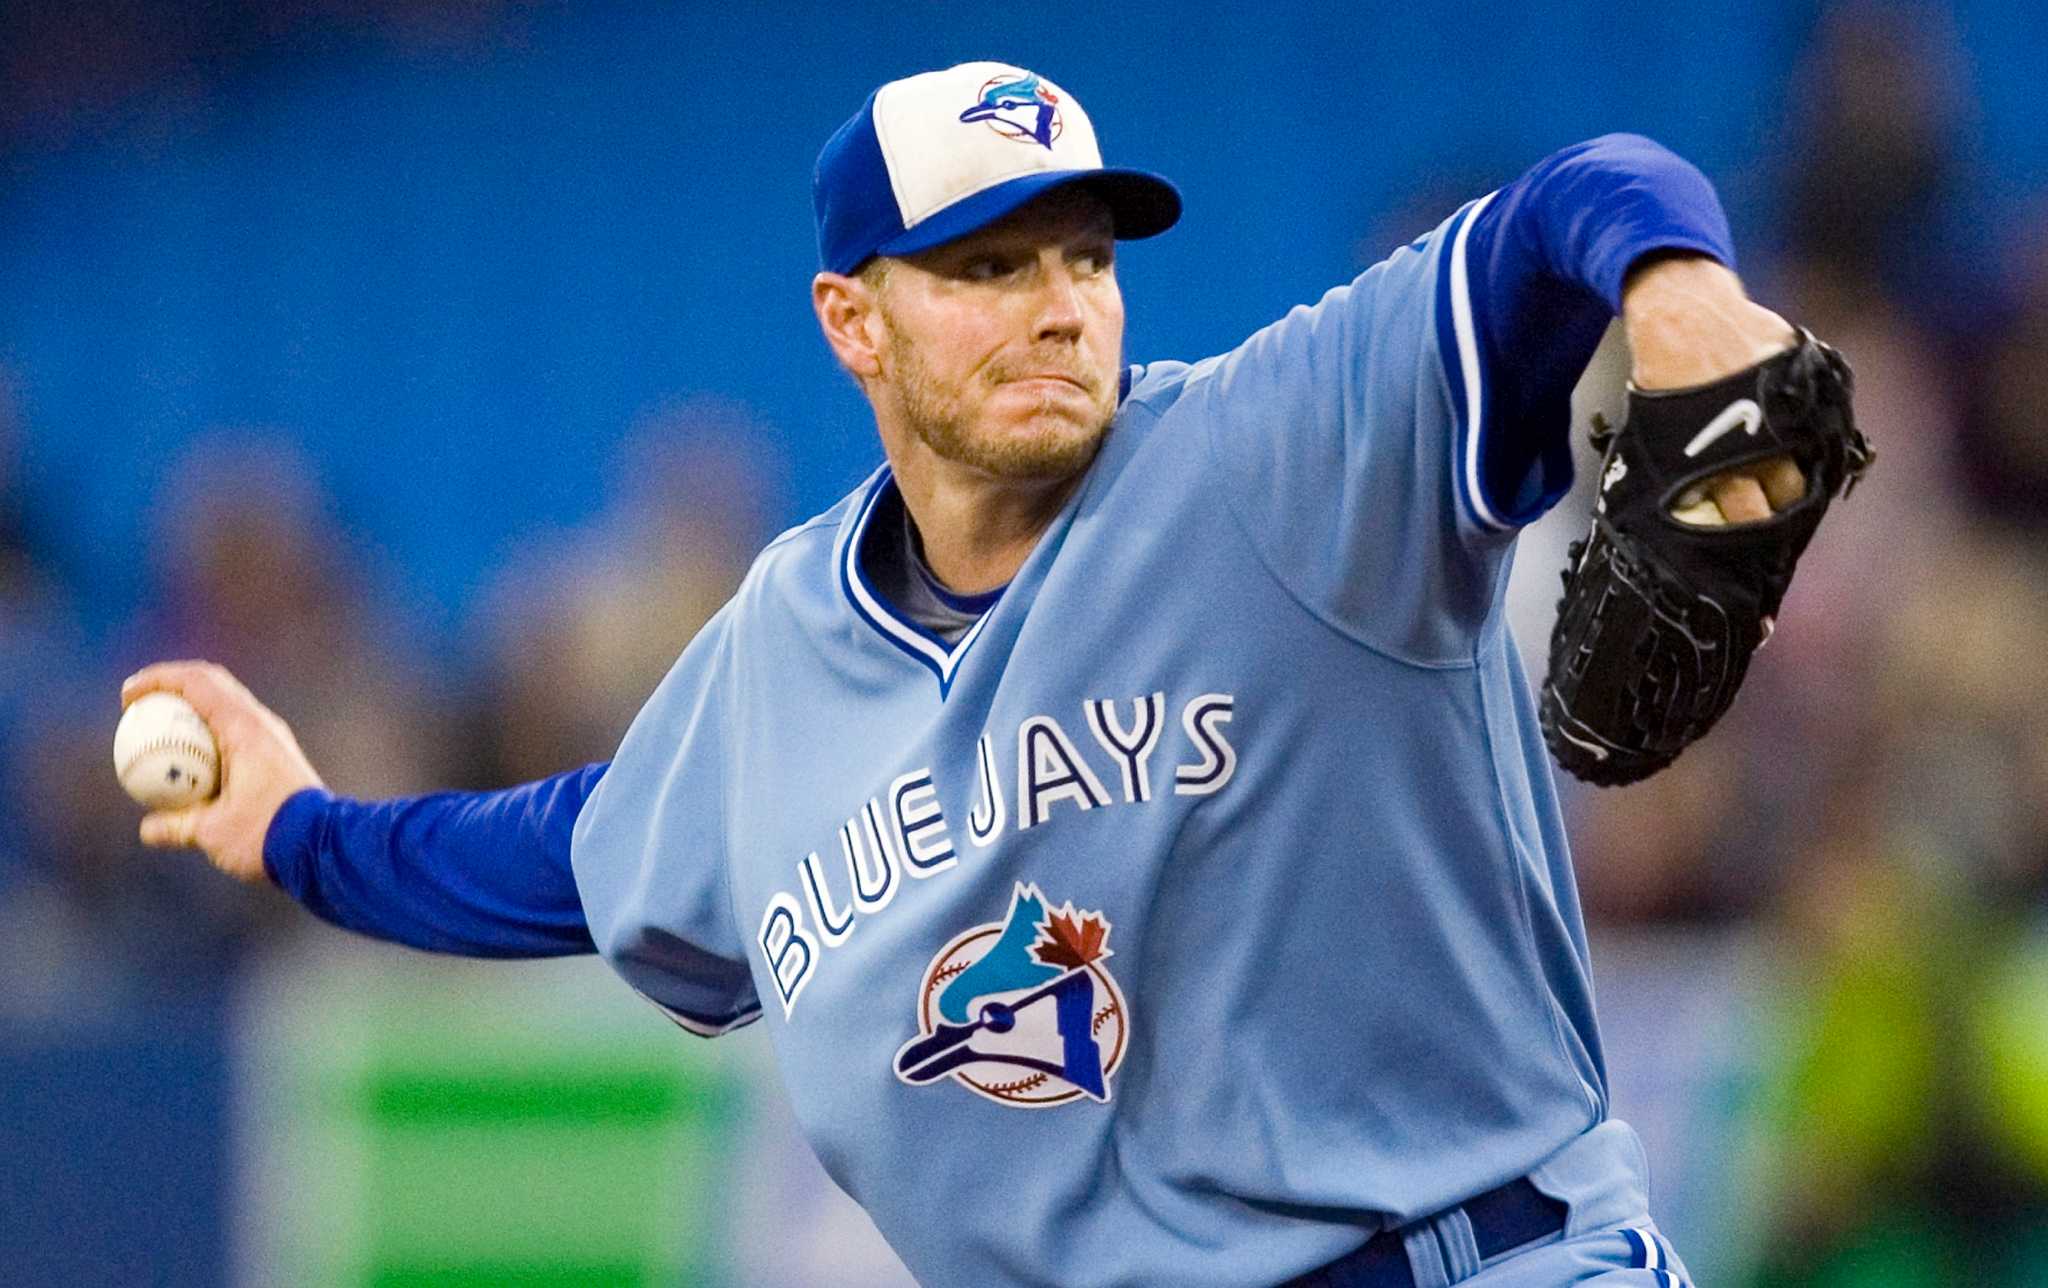 Baseball great Roy Halladay's plane performed steep turns before